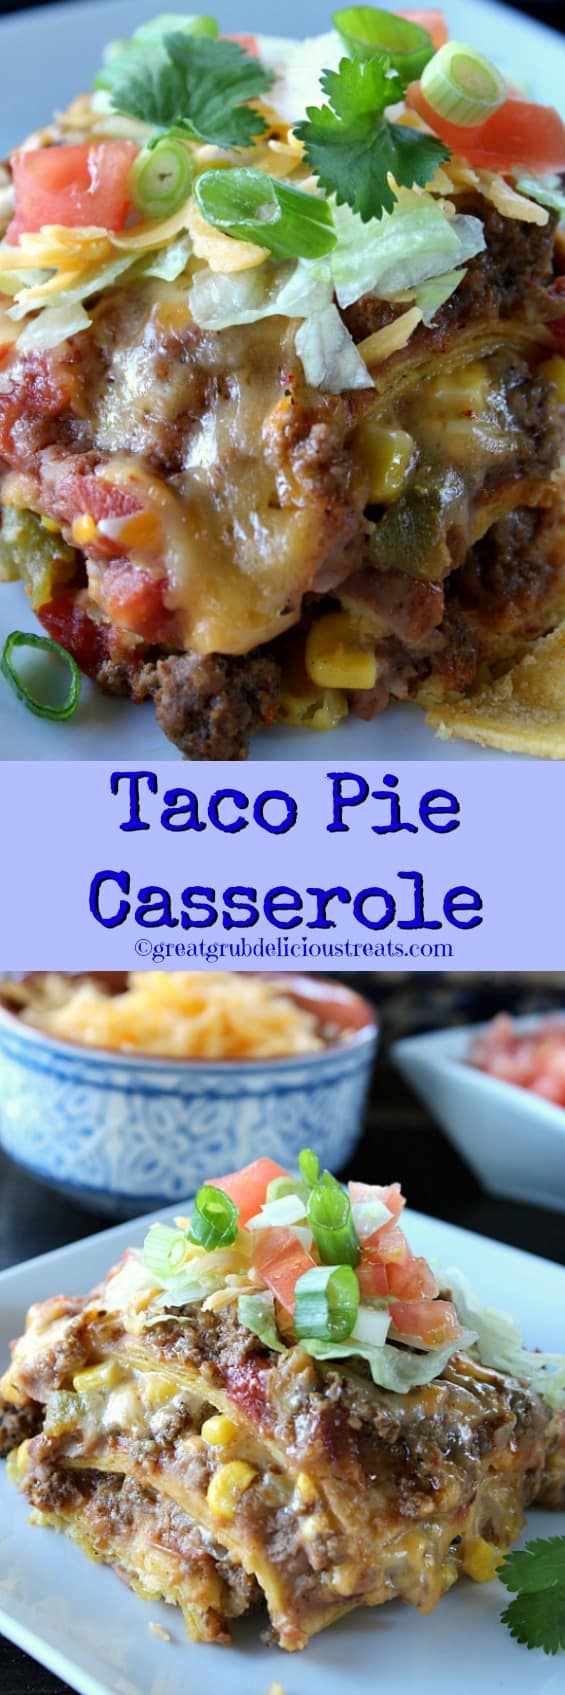 A double collage photo of taco pie casserole.